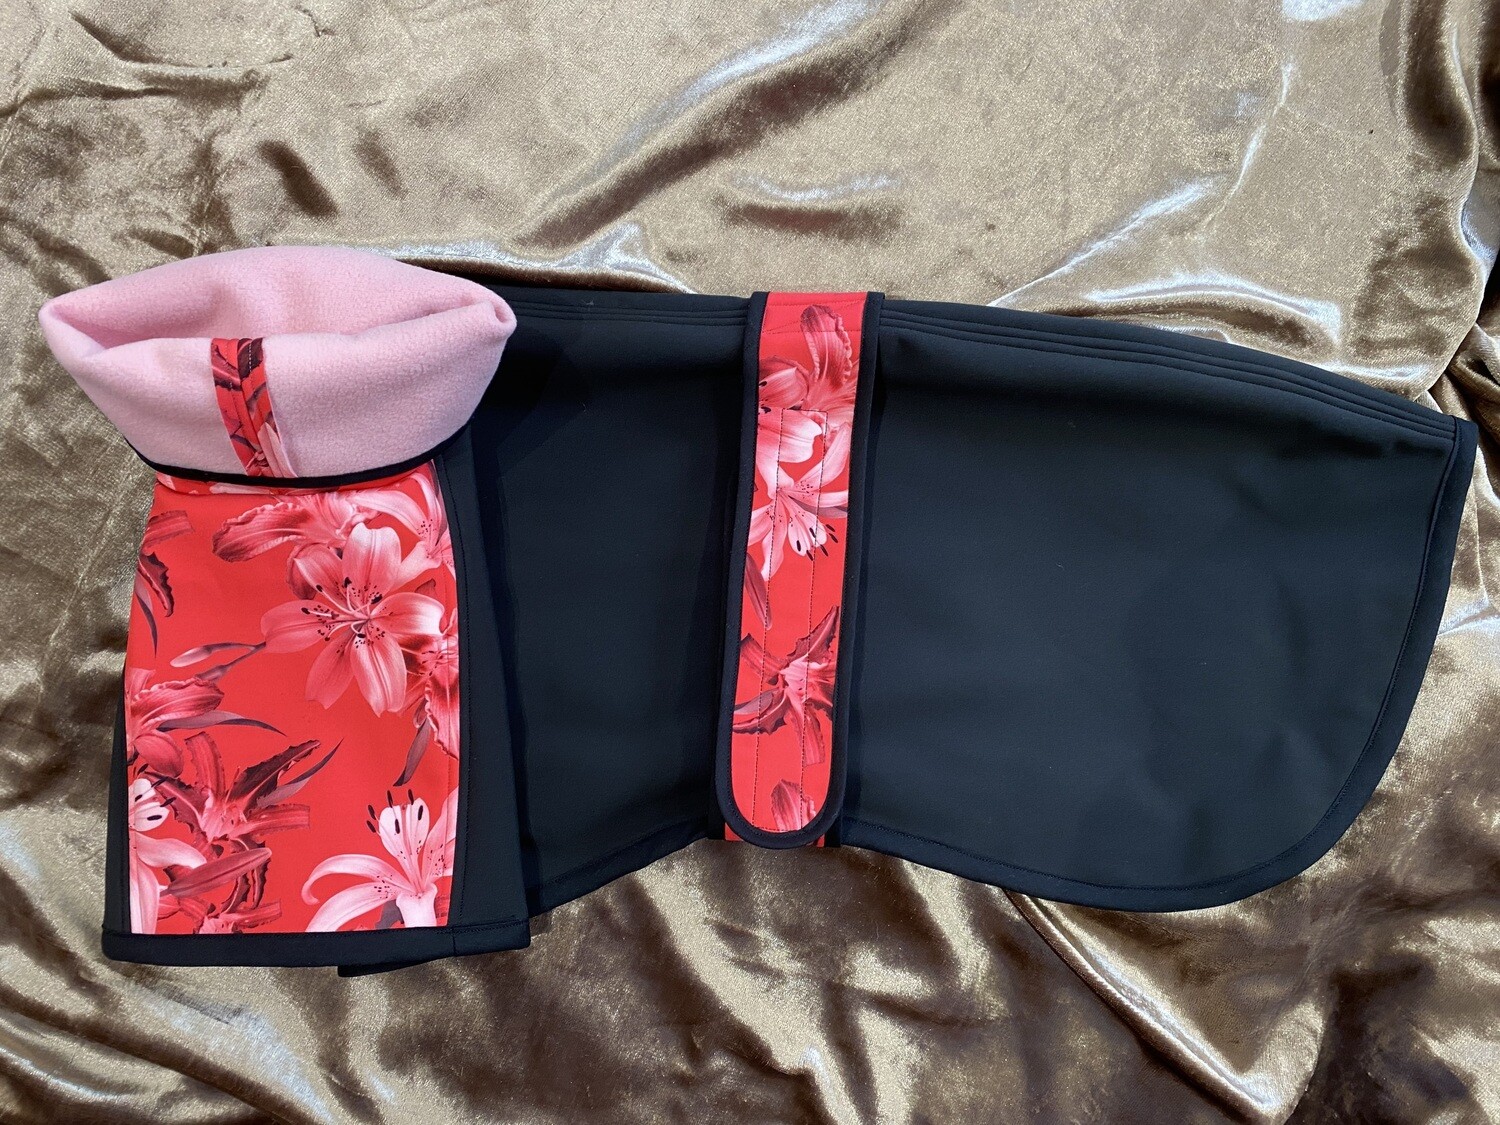 24" Fleece Lined Raincoat - Black with Reddy Pink Lilies Design - ONE OFF!!